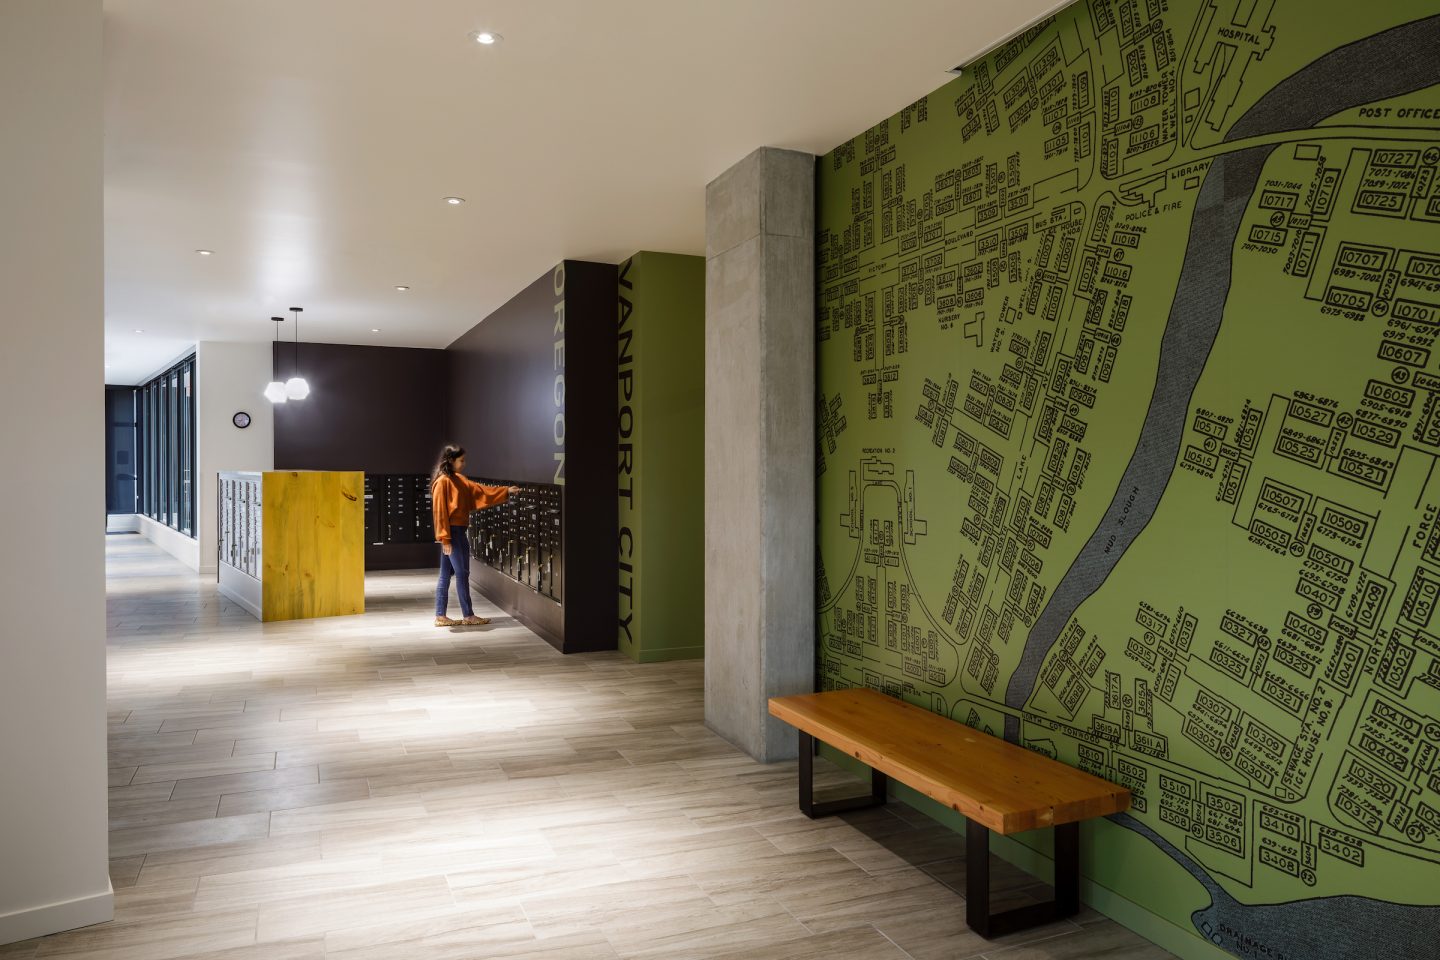 A Green Abstracted Map Of Historic Vanport Lines The Walls Of Renaissance Common's Lobby. 